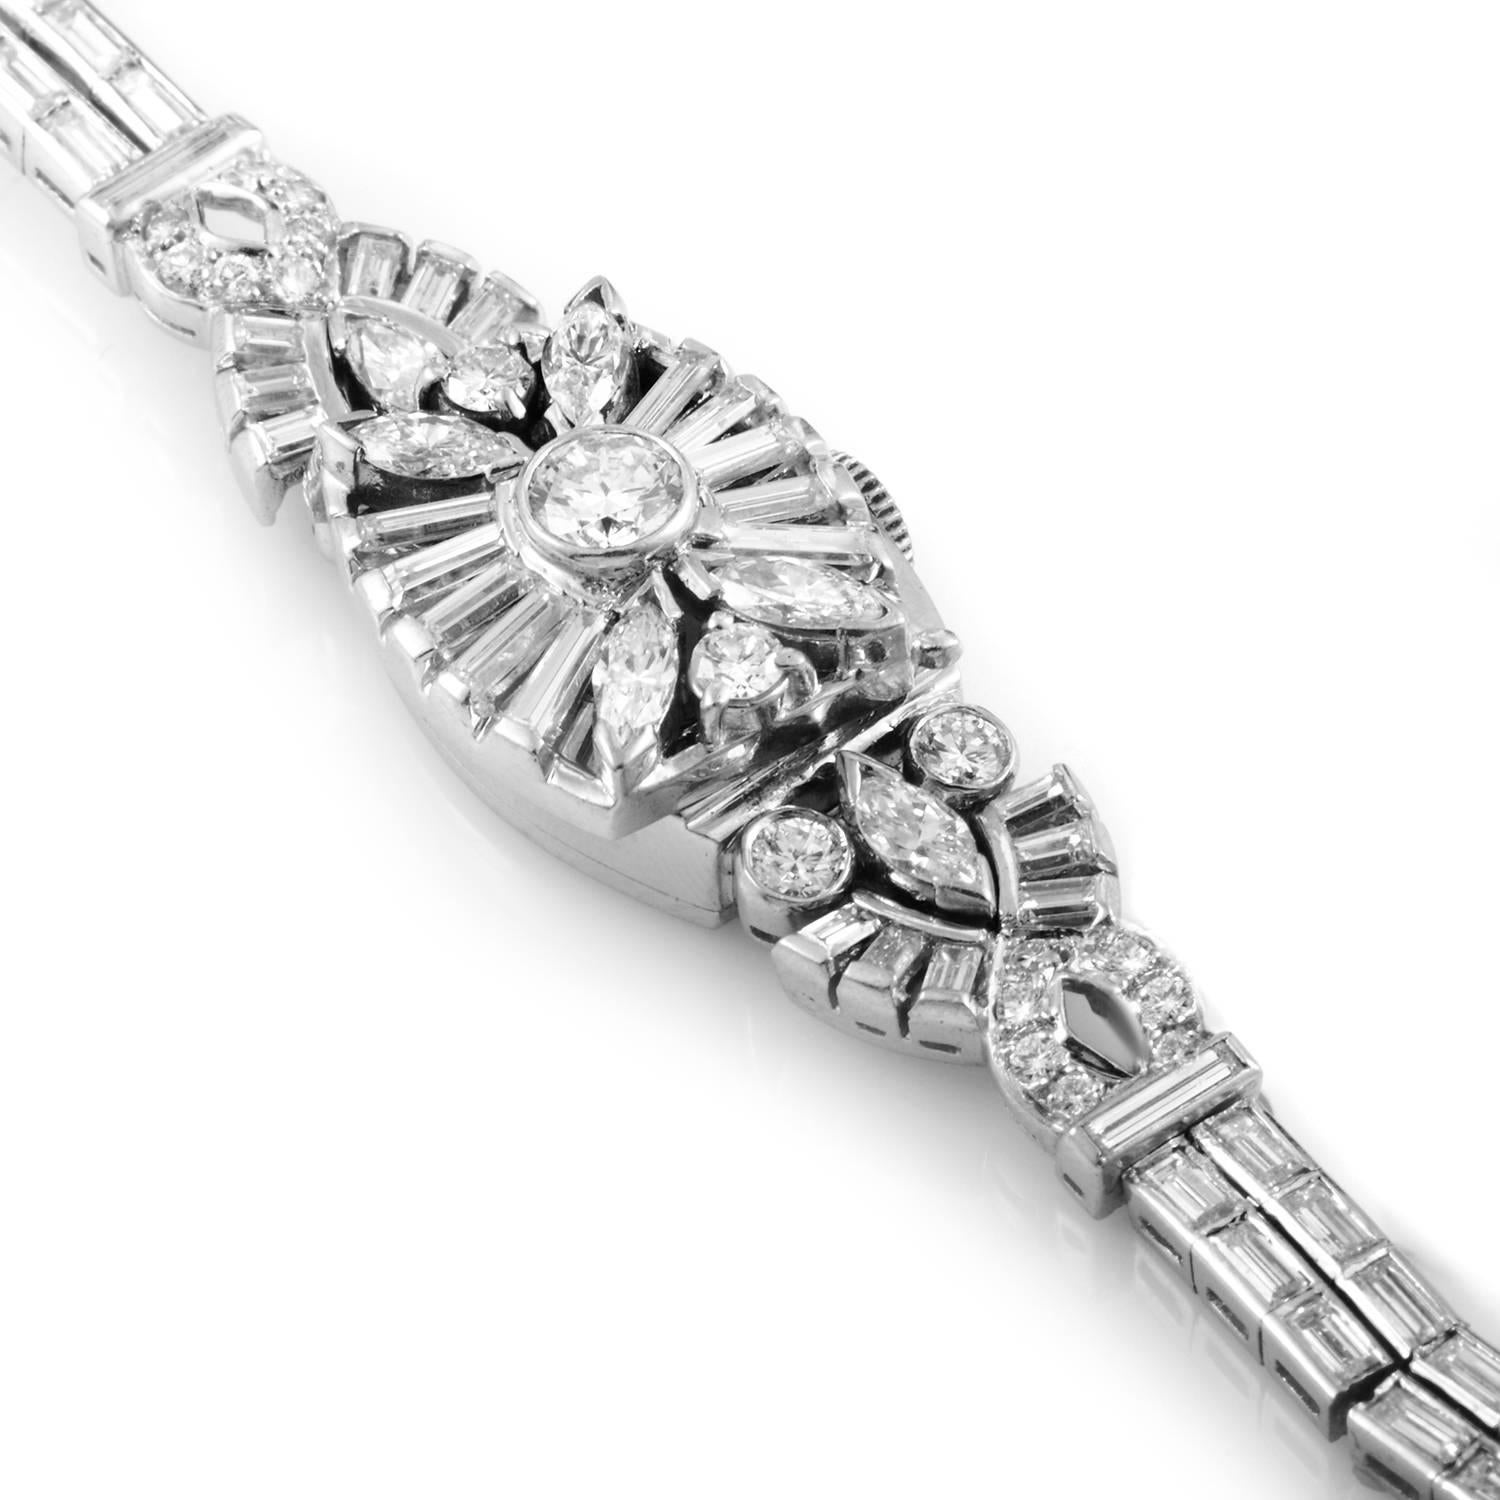 This watch is its own enthralling piece of jewelry. Forged from Platinum, this antique is pieced together in intricate detail, spinning patterns into cohesive design guaranteed to draw admirers at every turn. Giving compliment to each segment are